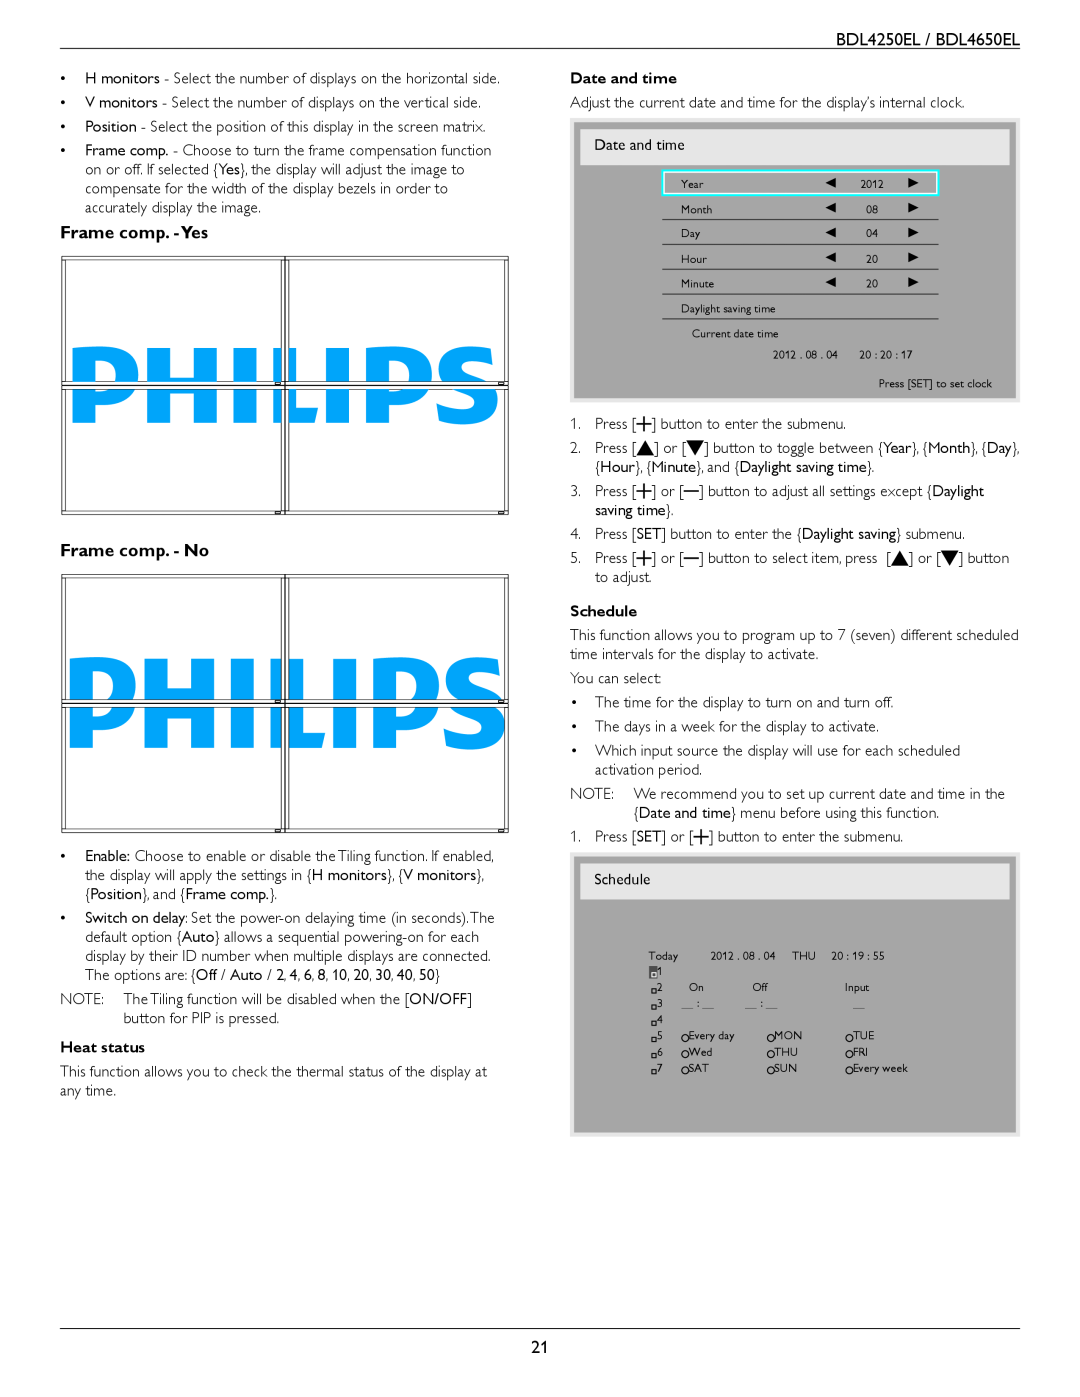 Philips BDL4250EL, BDL4650E user manual Frame comp. -Yes Frame comp. - No, Heat status, Date and time, Schedule 